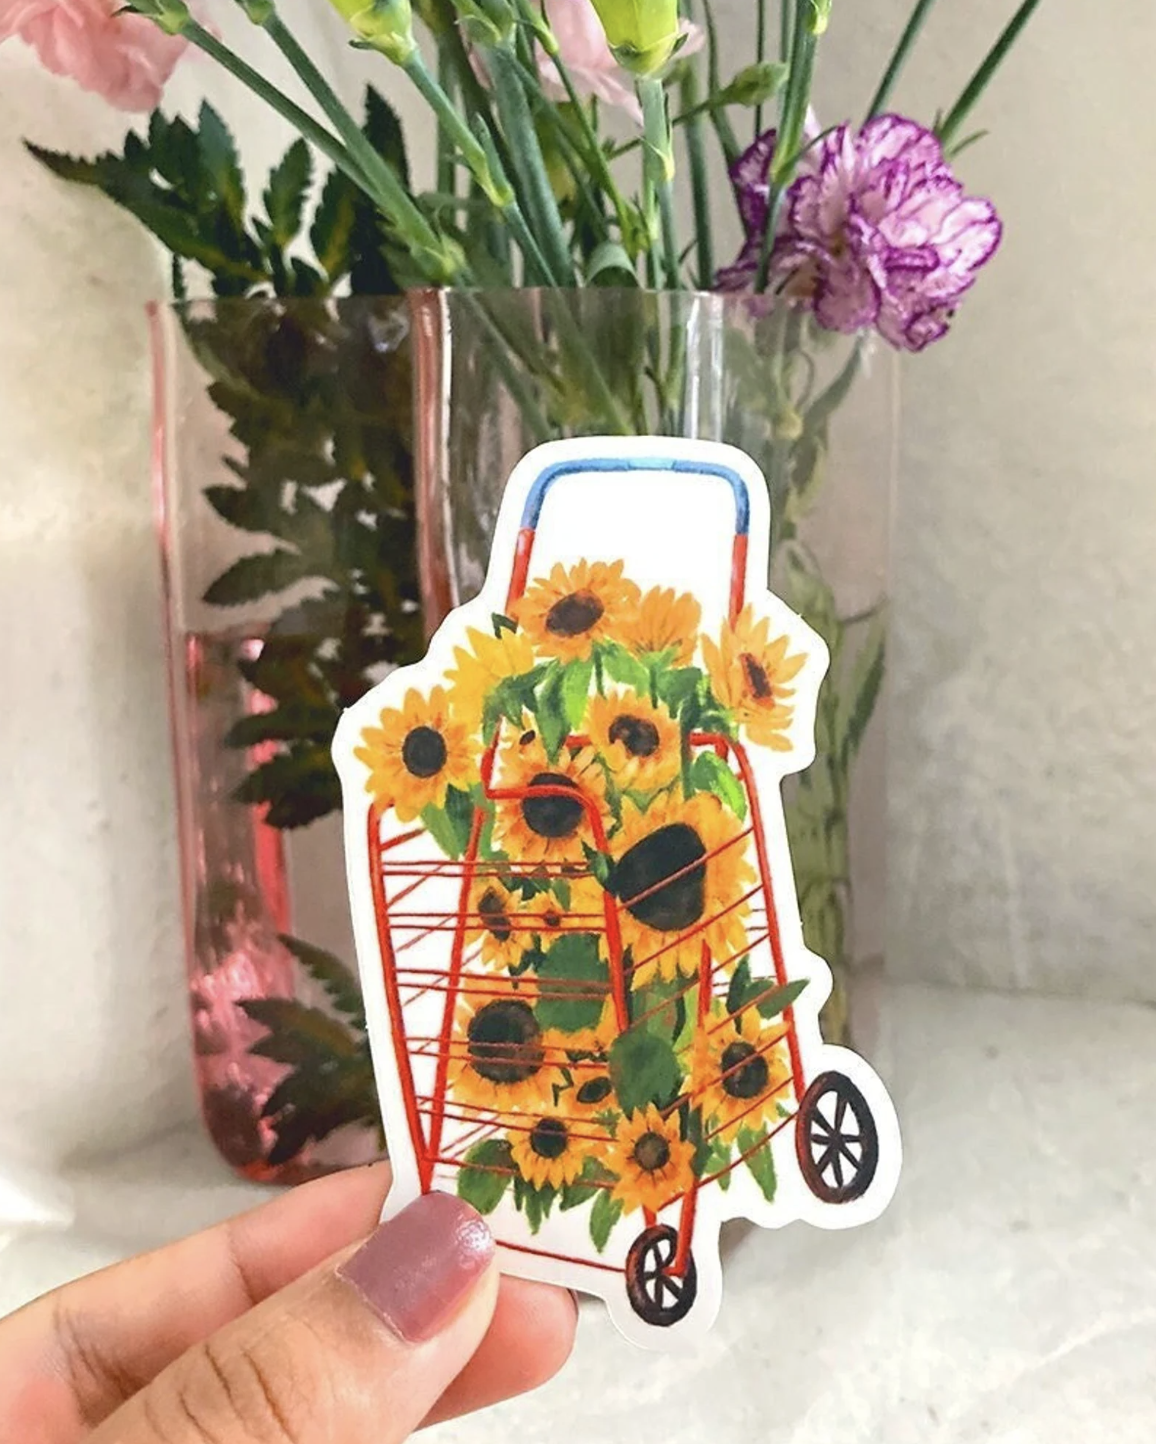 Hand holding a sticker of a cart filled with sunflowers.